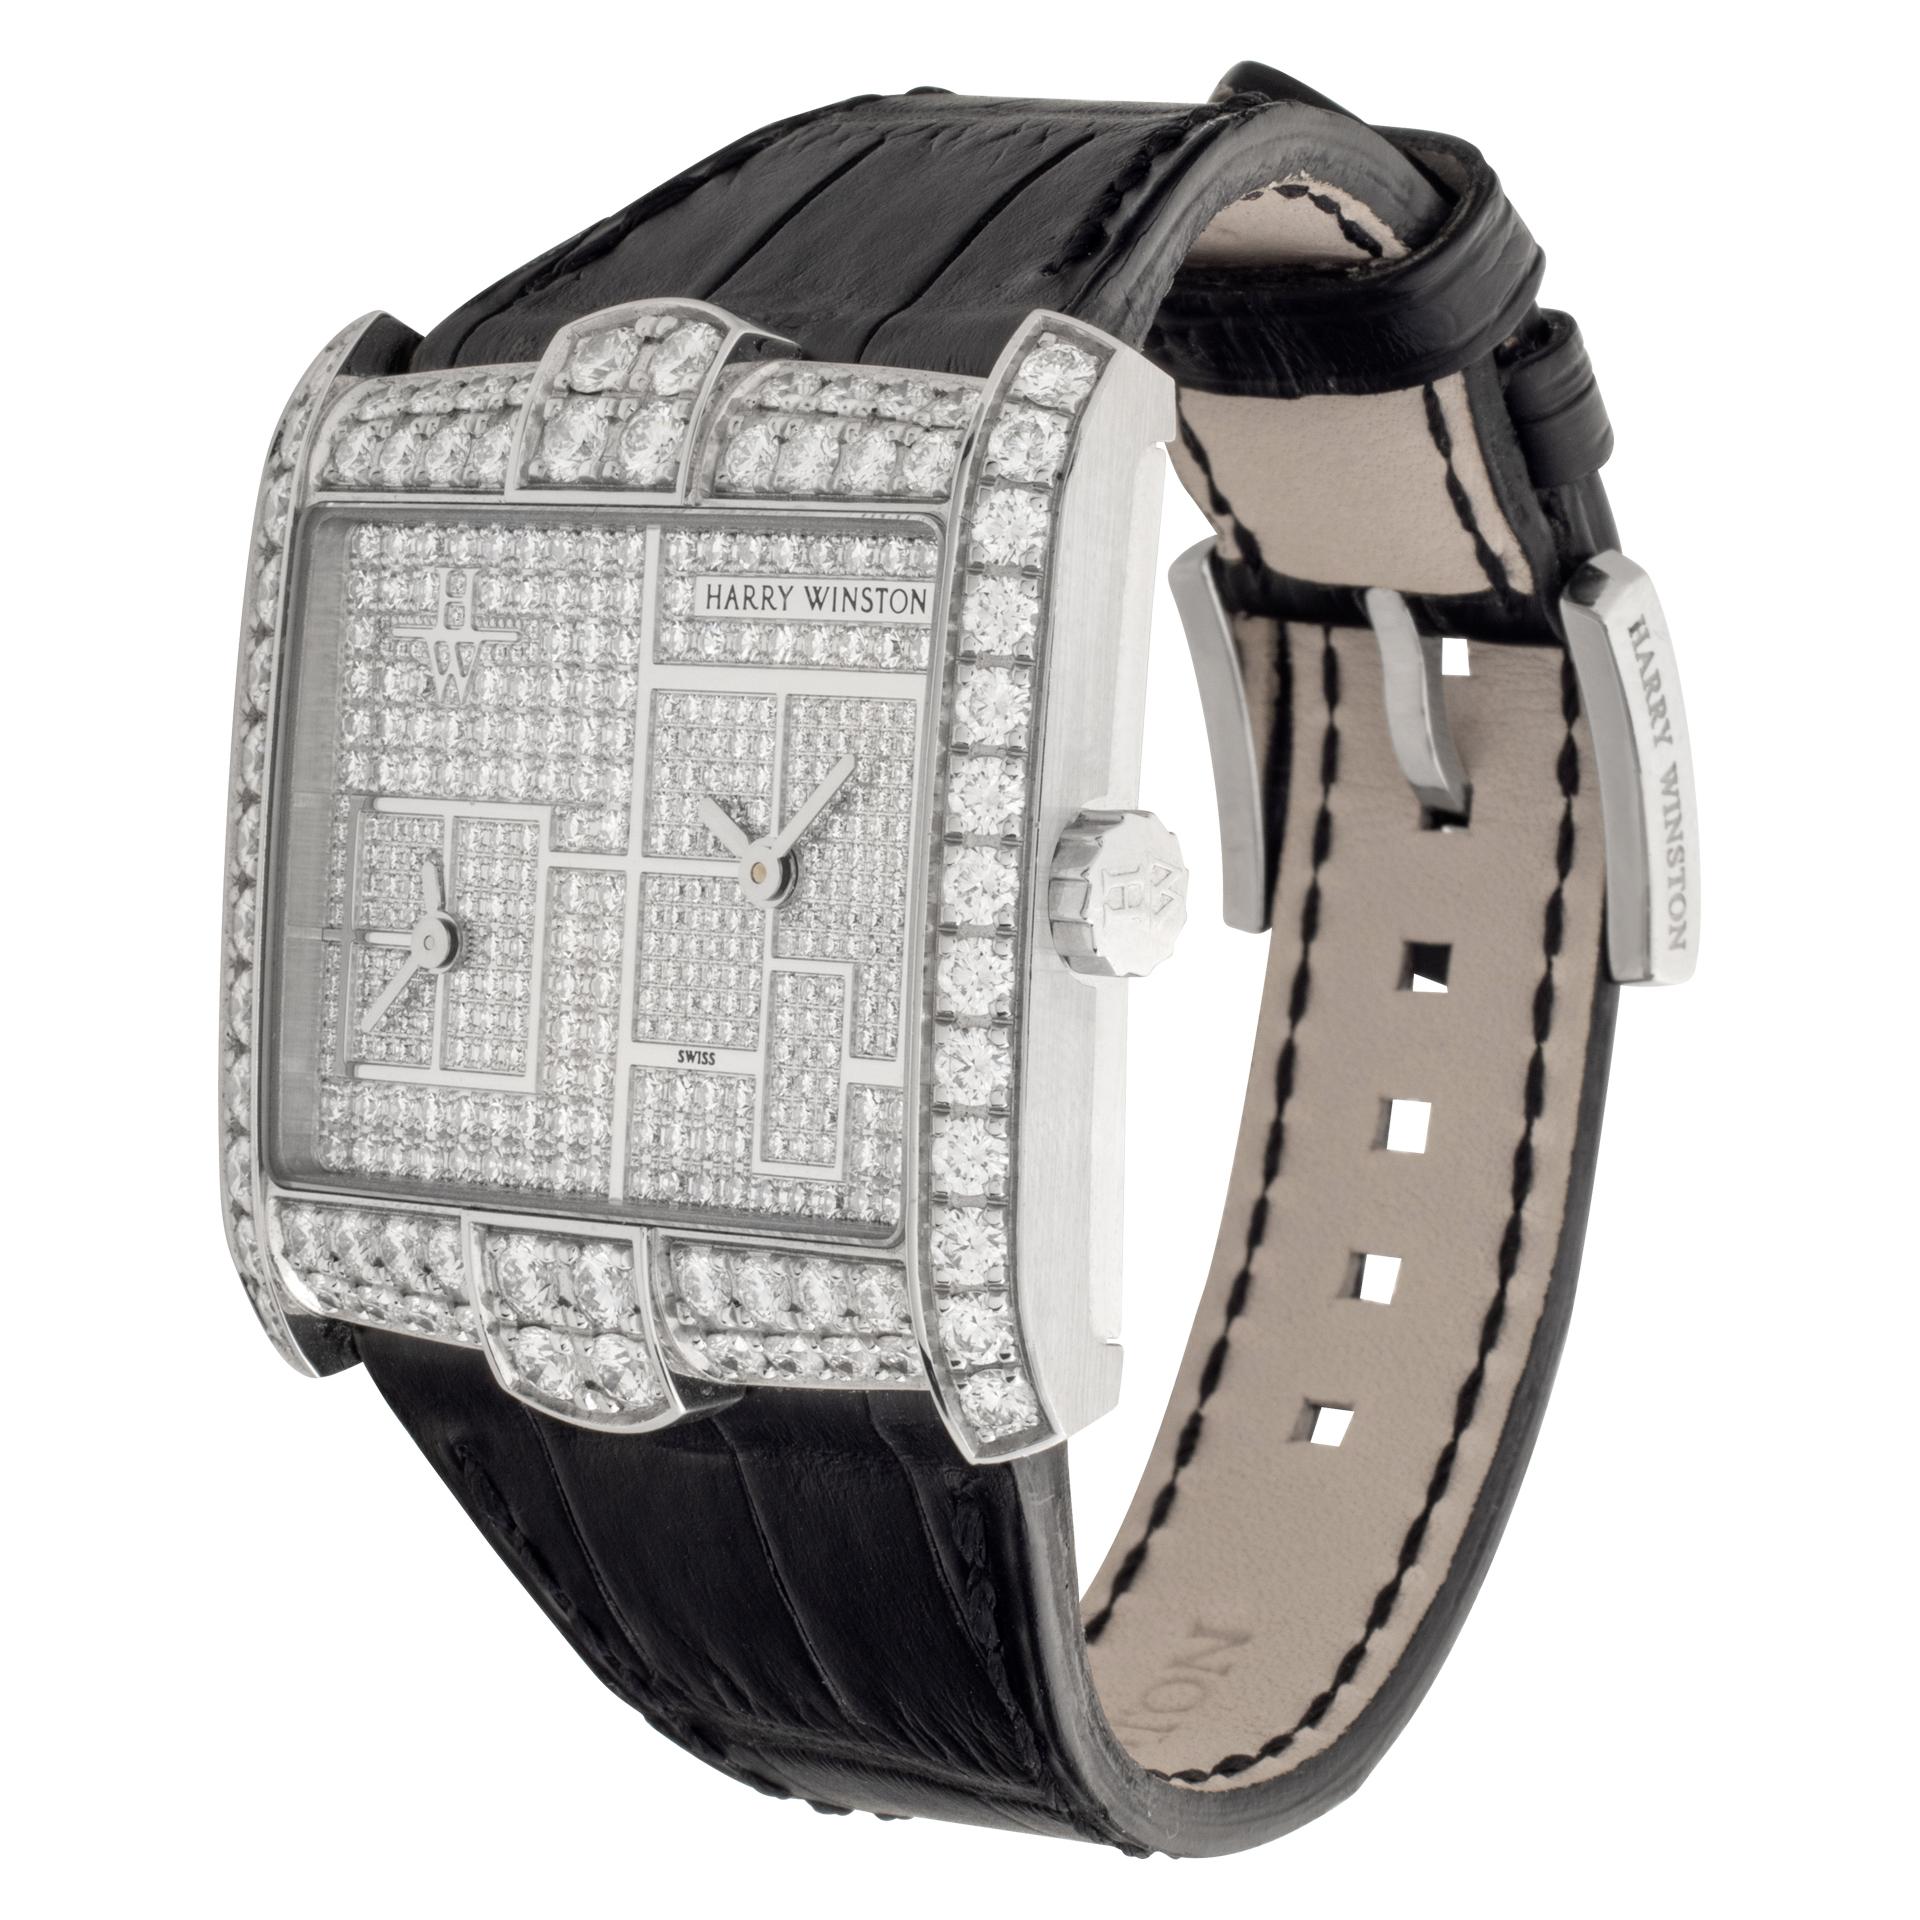 Harry Winston Avenue Squared A2 with full pave diamond dial in 18k white gold. Limited edition of only 20 pieces. Original diamond case and diamond tang buckle - approximately 7.7 carats in round brilliant cut diamonds. Black alligator strap. Quartz